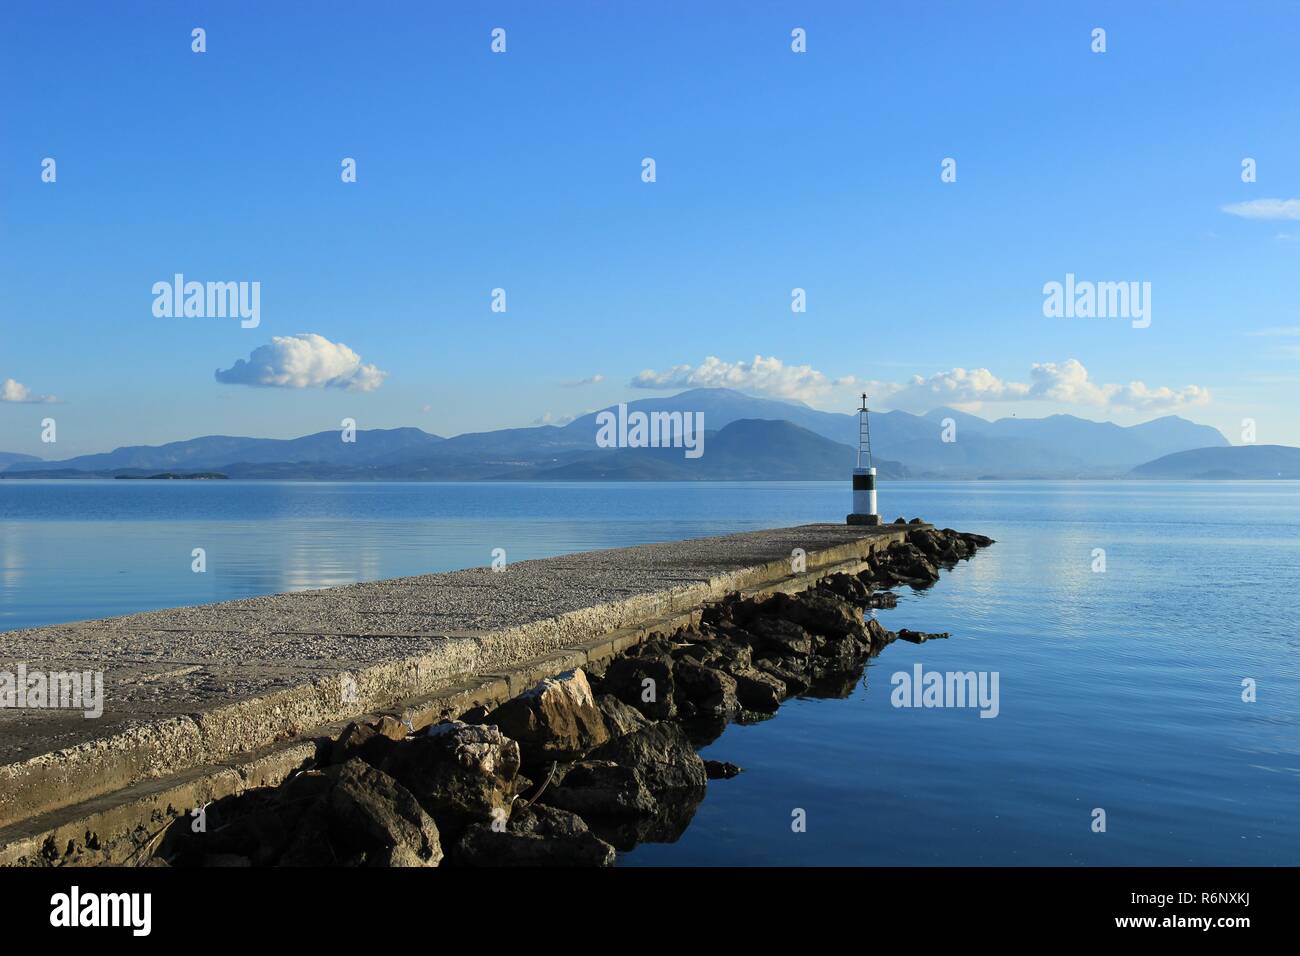 Lighthouse at the end of pier at Koronisia village in Ambracian gulf, Epirus Greece, calm blue sea, clouds in the sky and view of mountains and hills Stock Photo